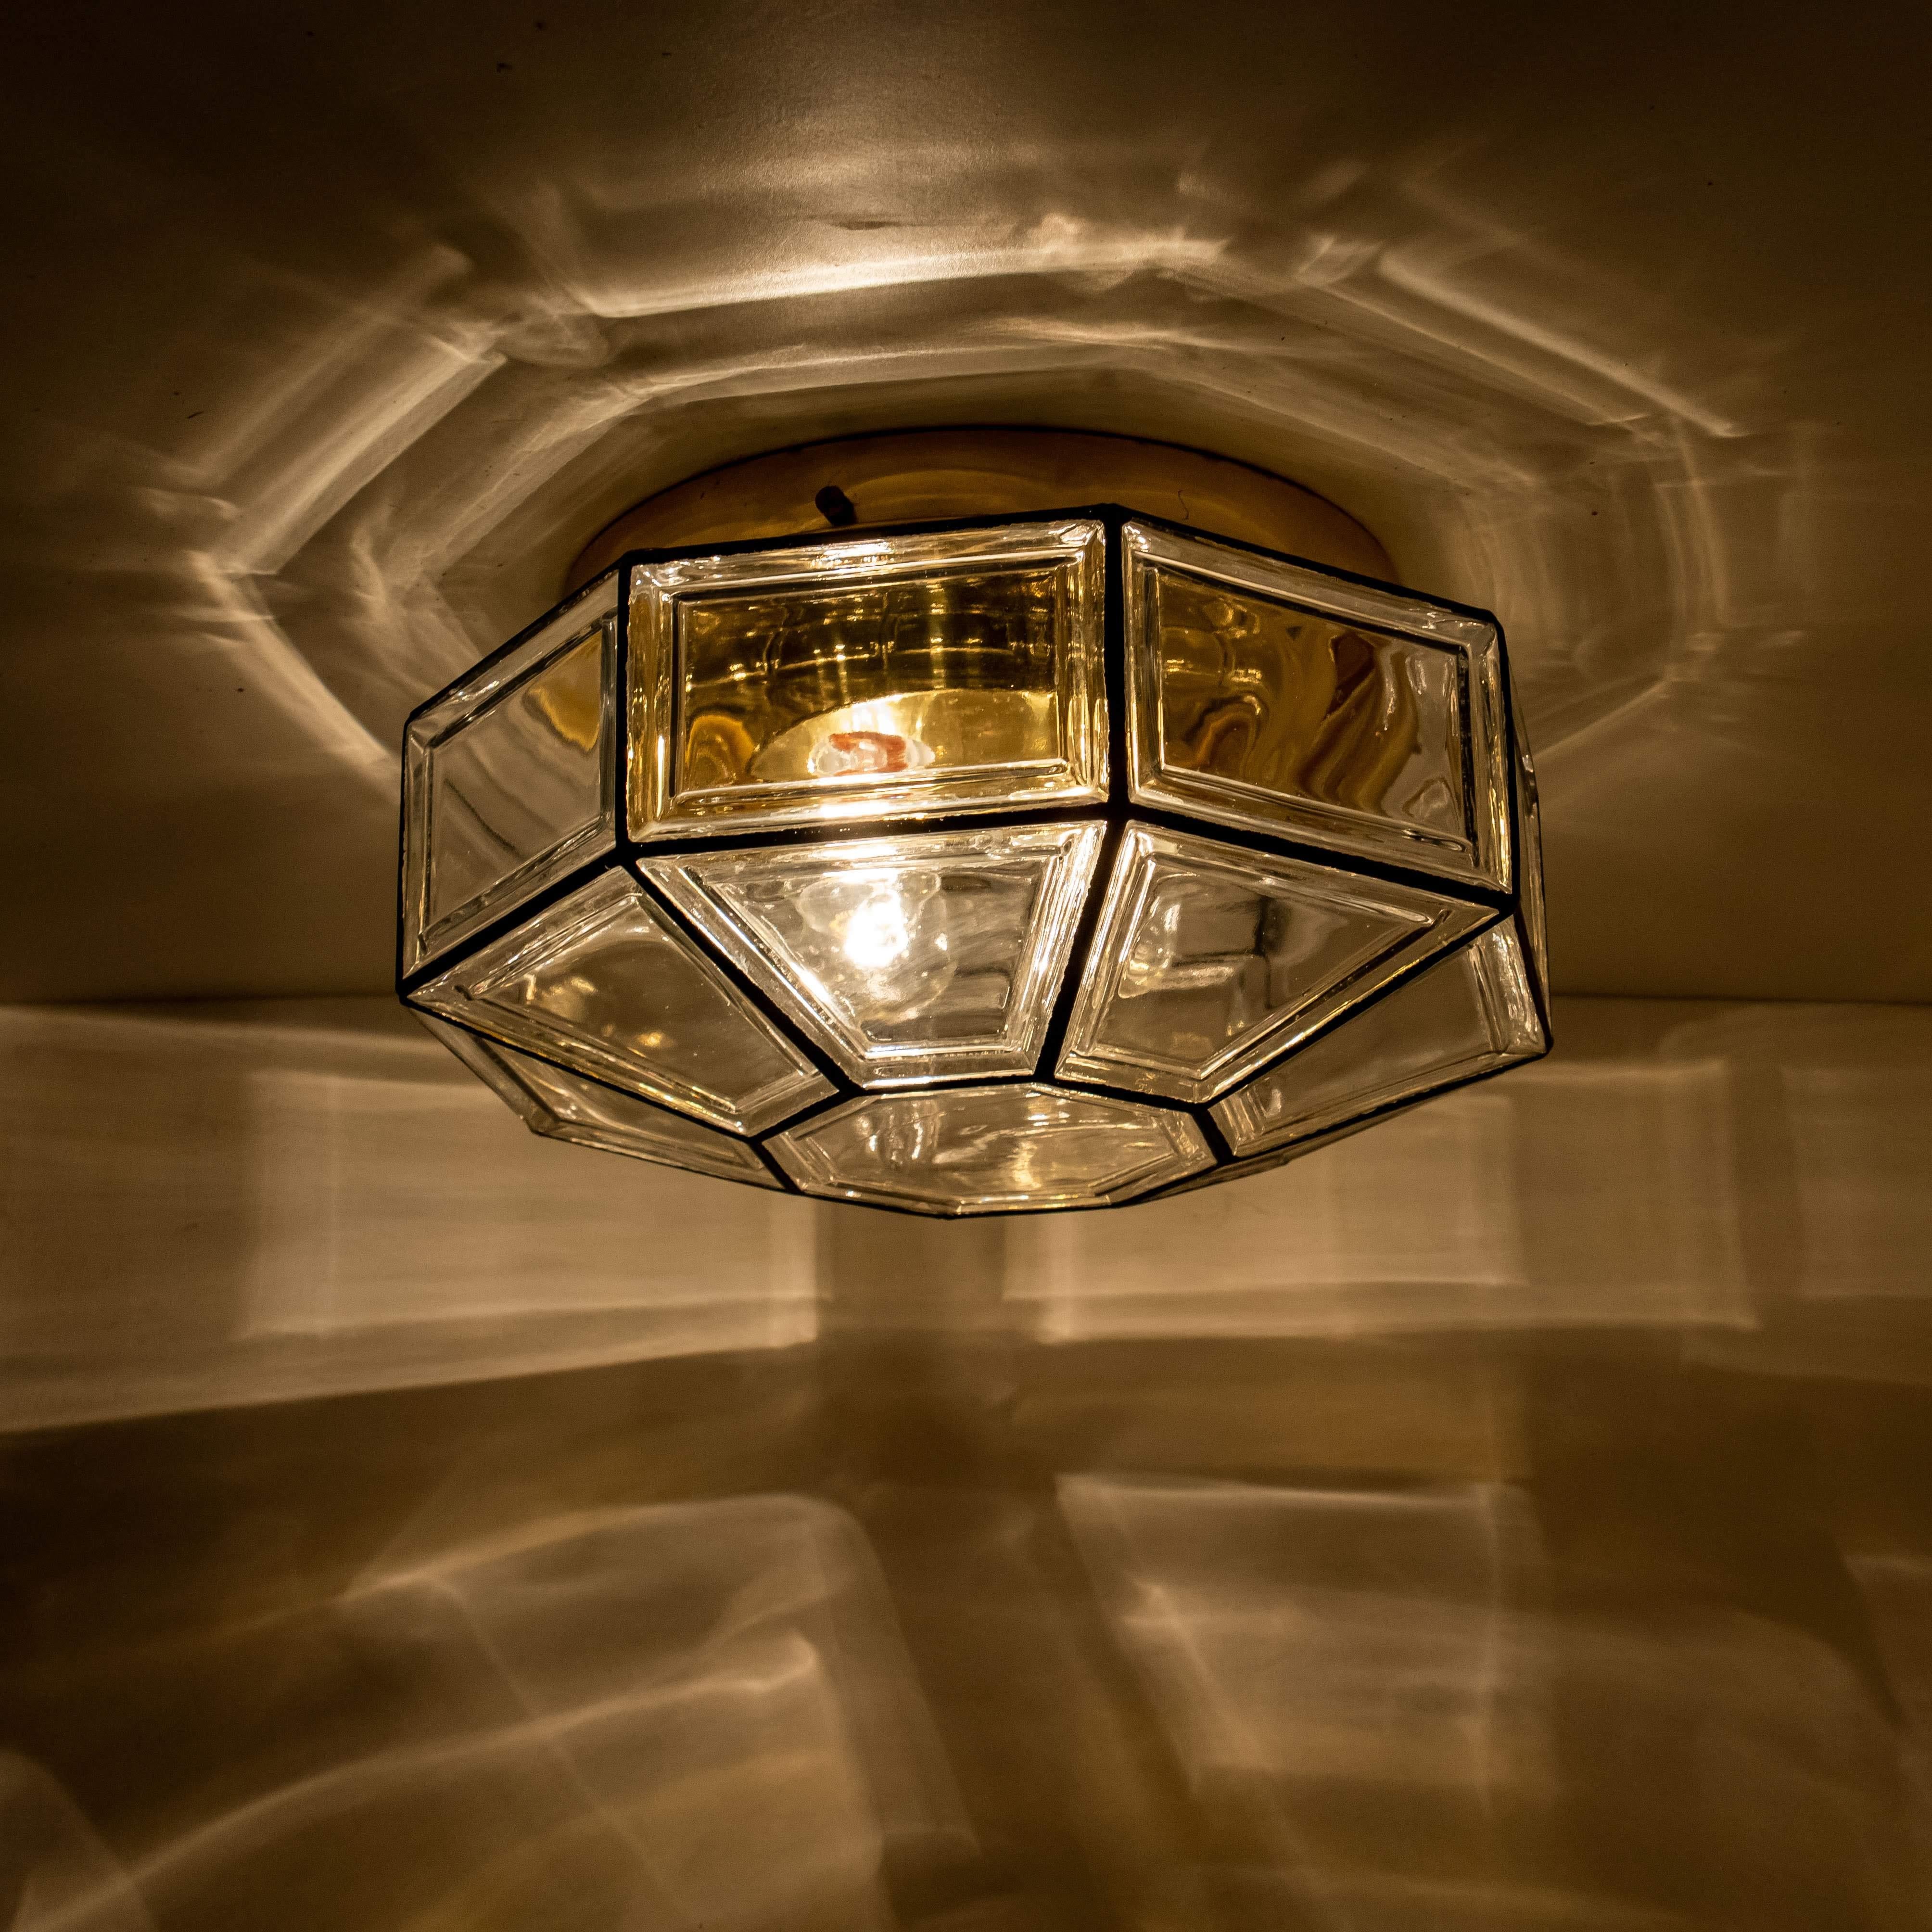 This beautiful and unique octagonal glass light flushmount or wall light was manufactured by Glashütte Limburg in Germany during the 1960s, (late 1960s or early 1970s). Nice craftsmanship. Elaborate clear bubble glass which bulges slightly out of